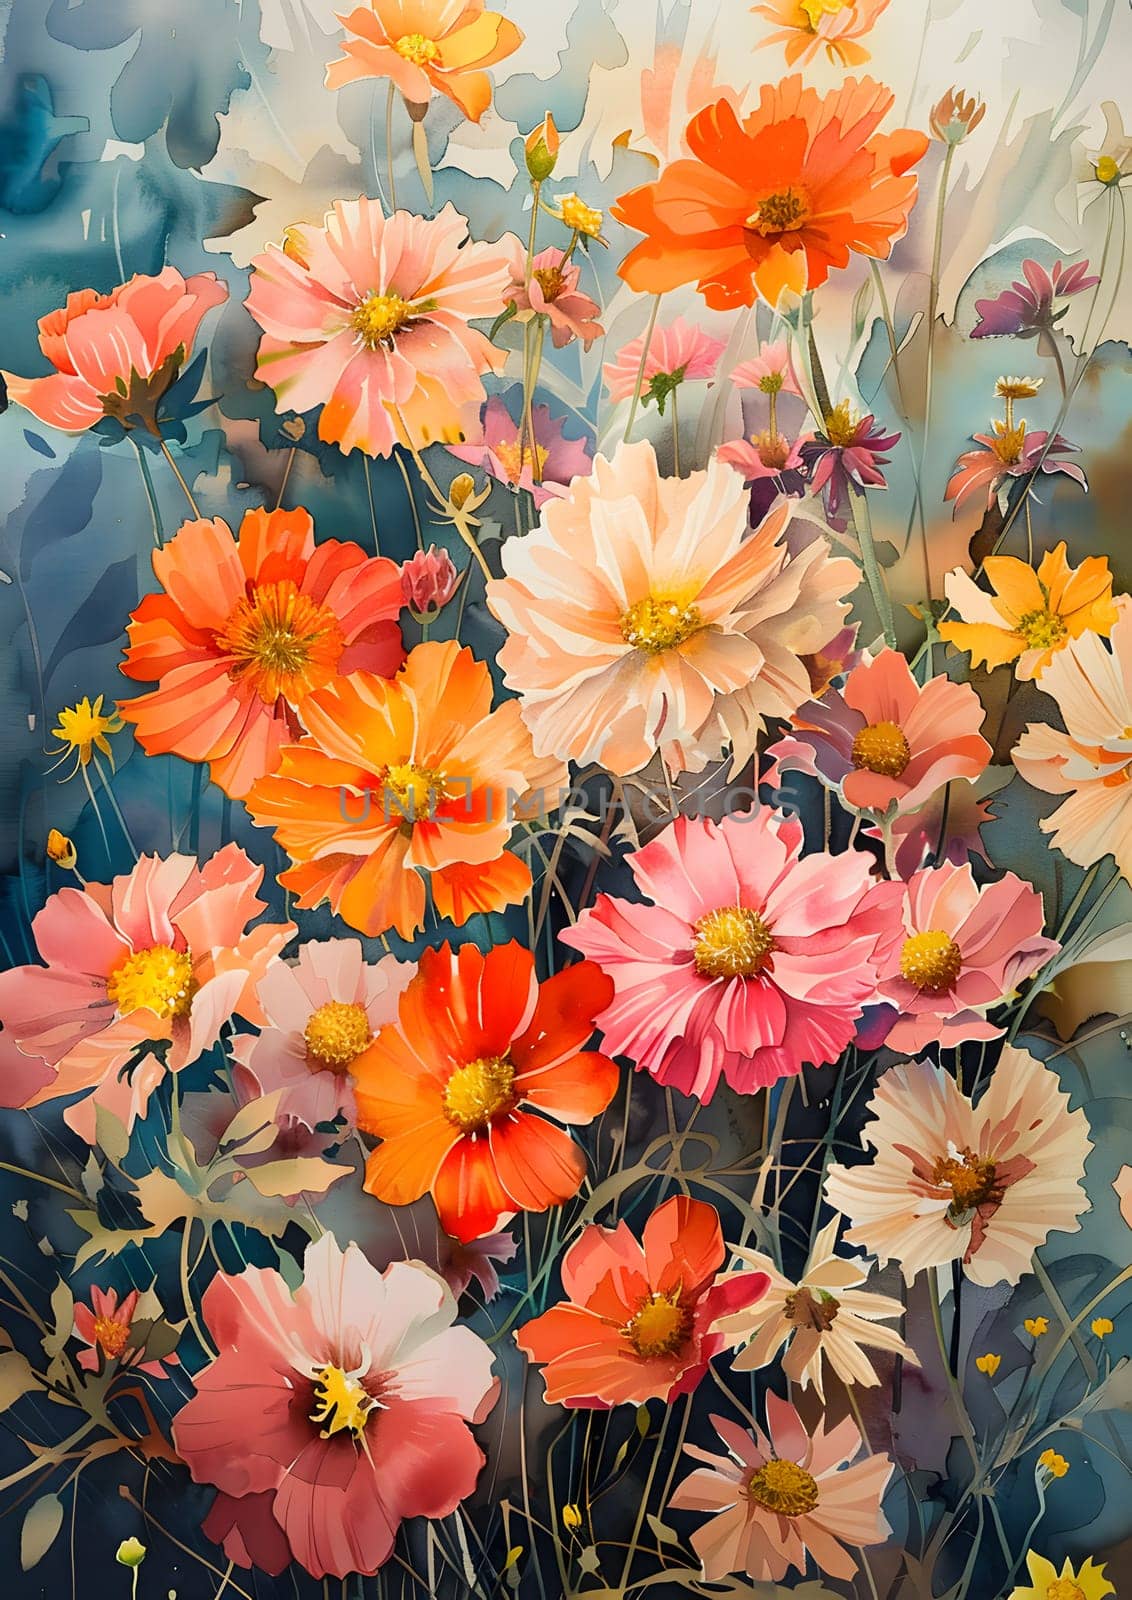 Vibrant flowers on a blue canvas, showcasing creative flower arranging by Nadtochiy